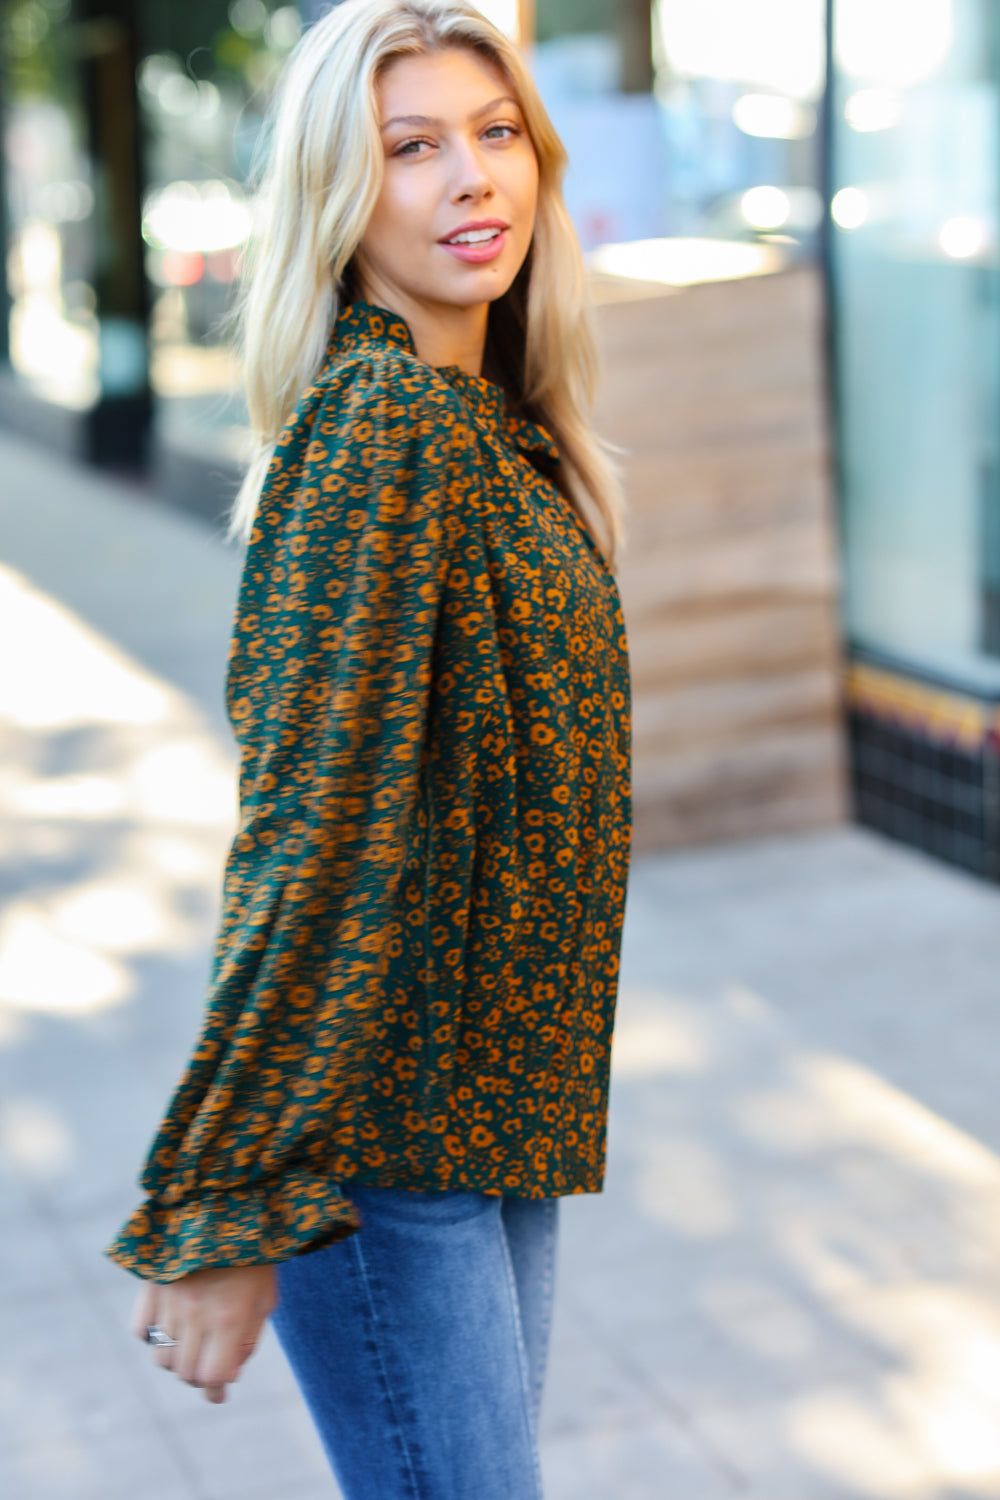 Love You Truly - Hunter Green Floral Top